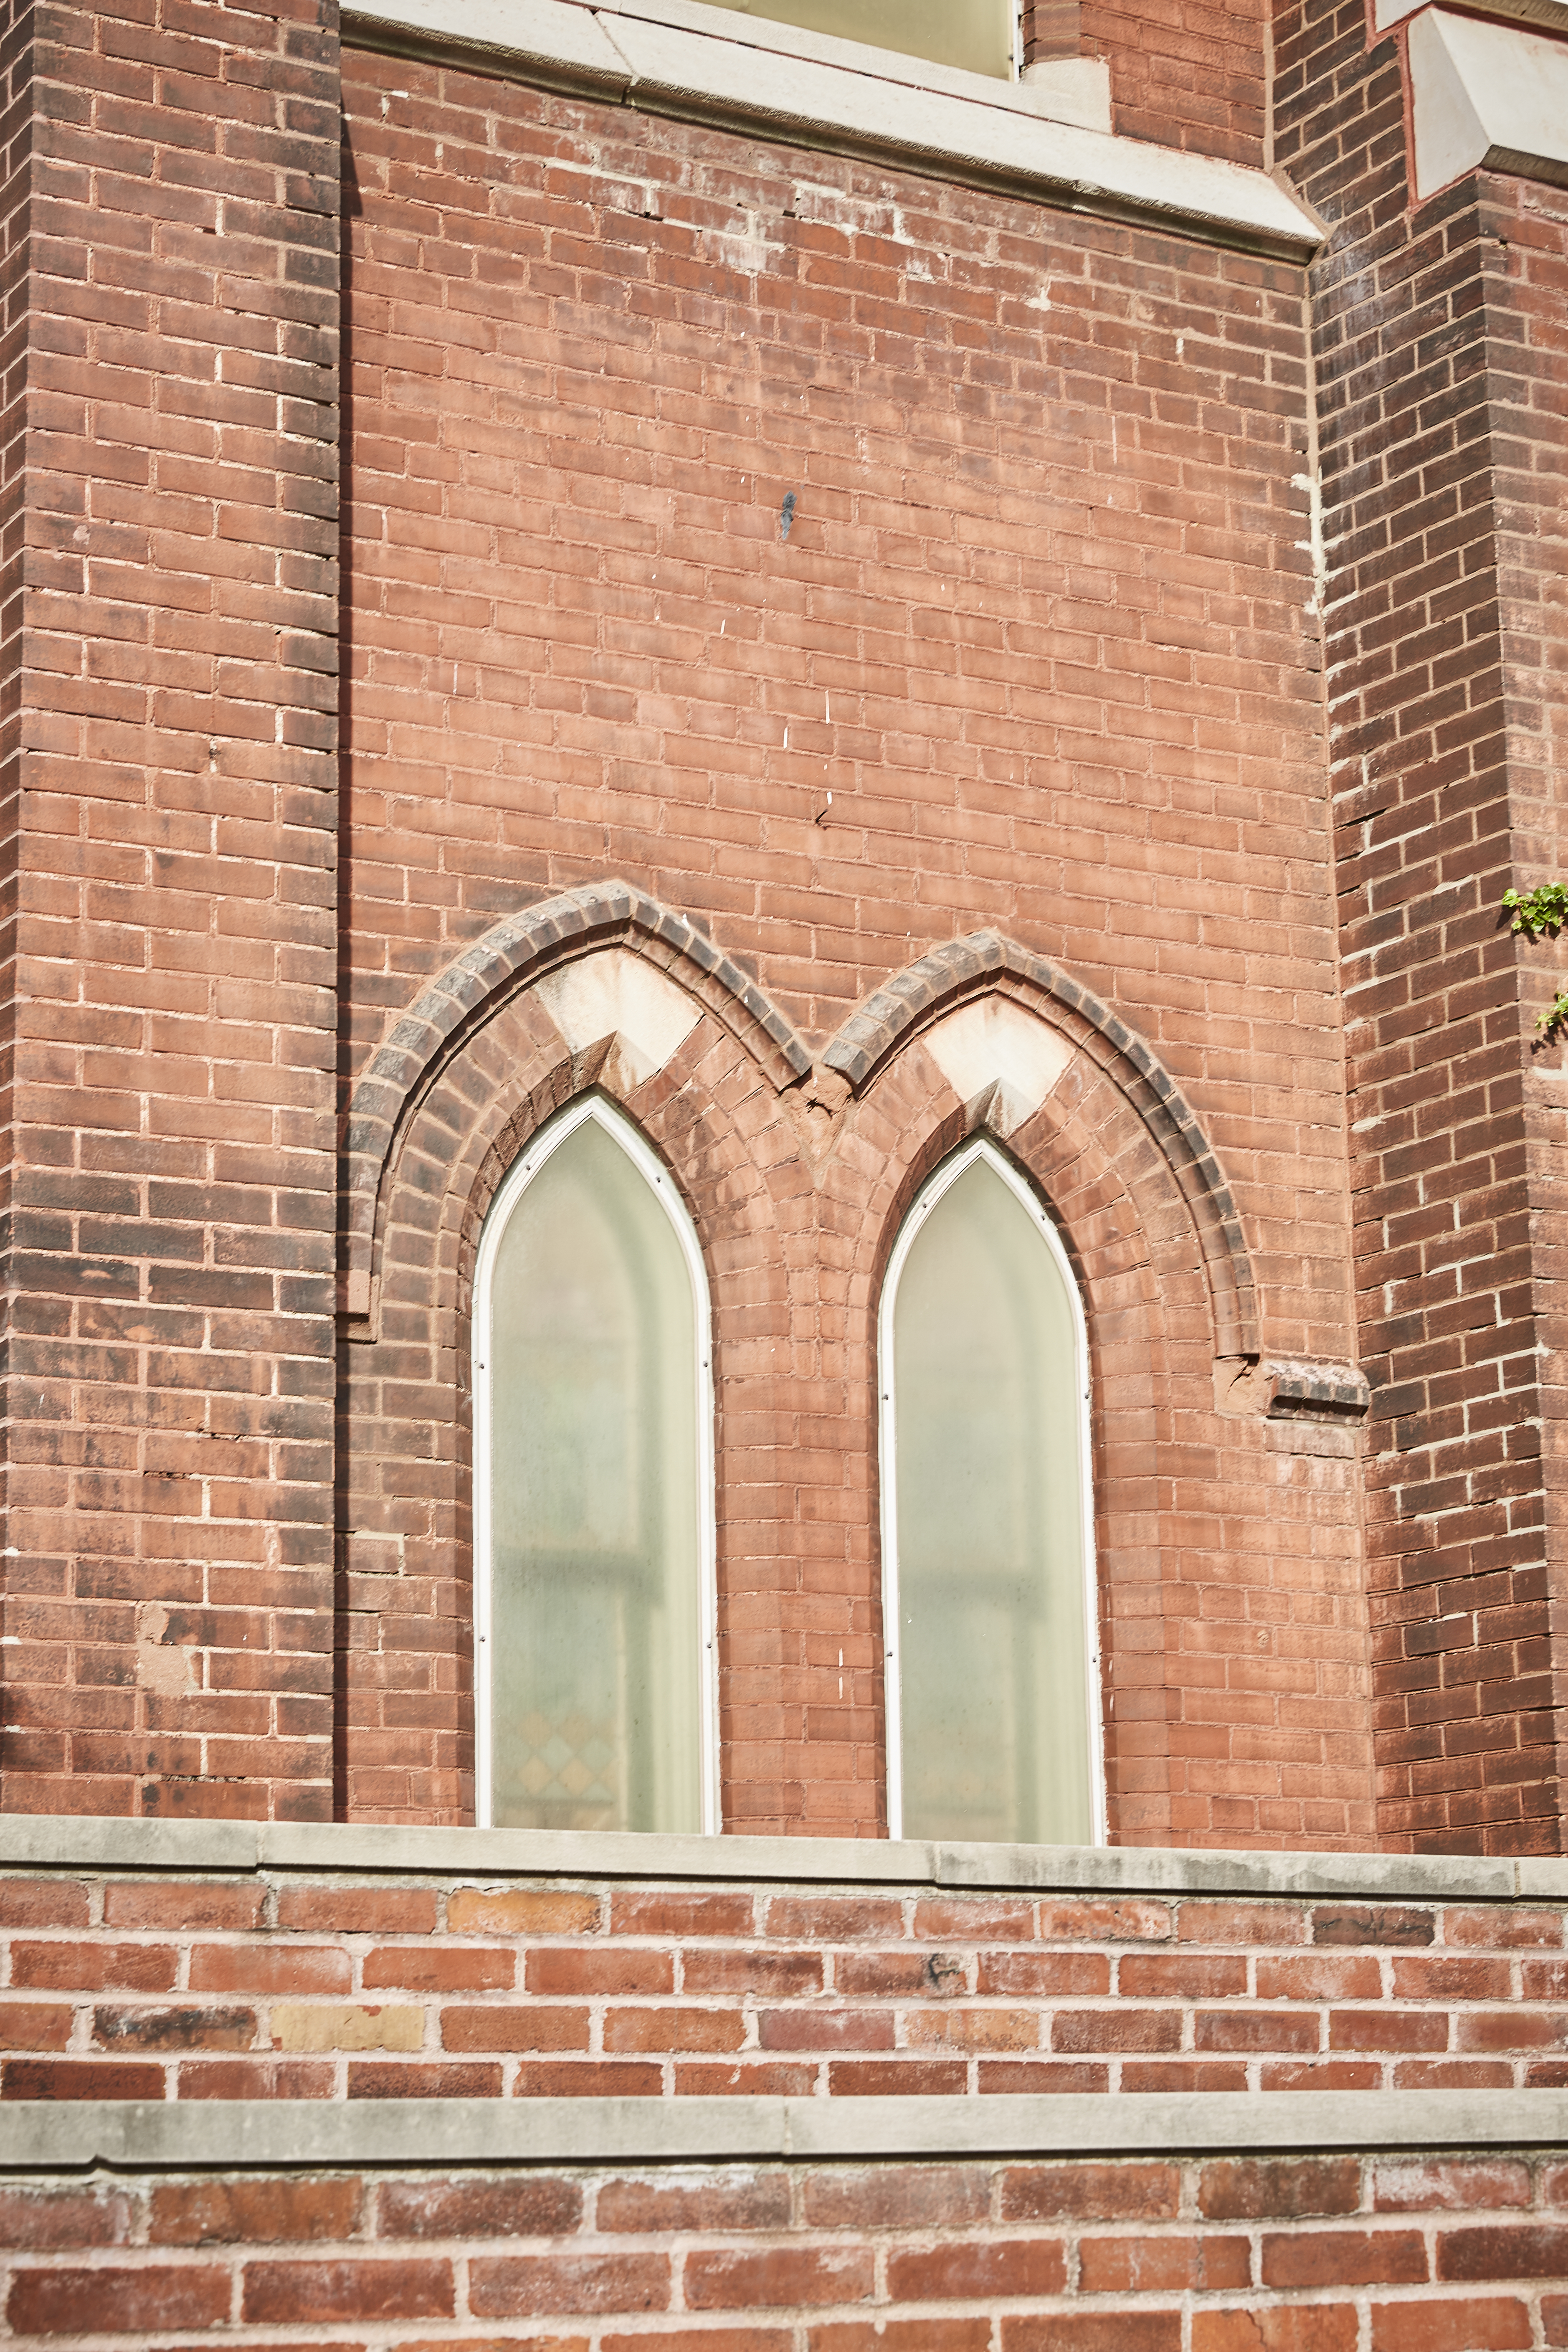 a brick building with two church-like windows in the center. the windows contain a cloudy, opaque glass.